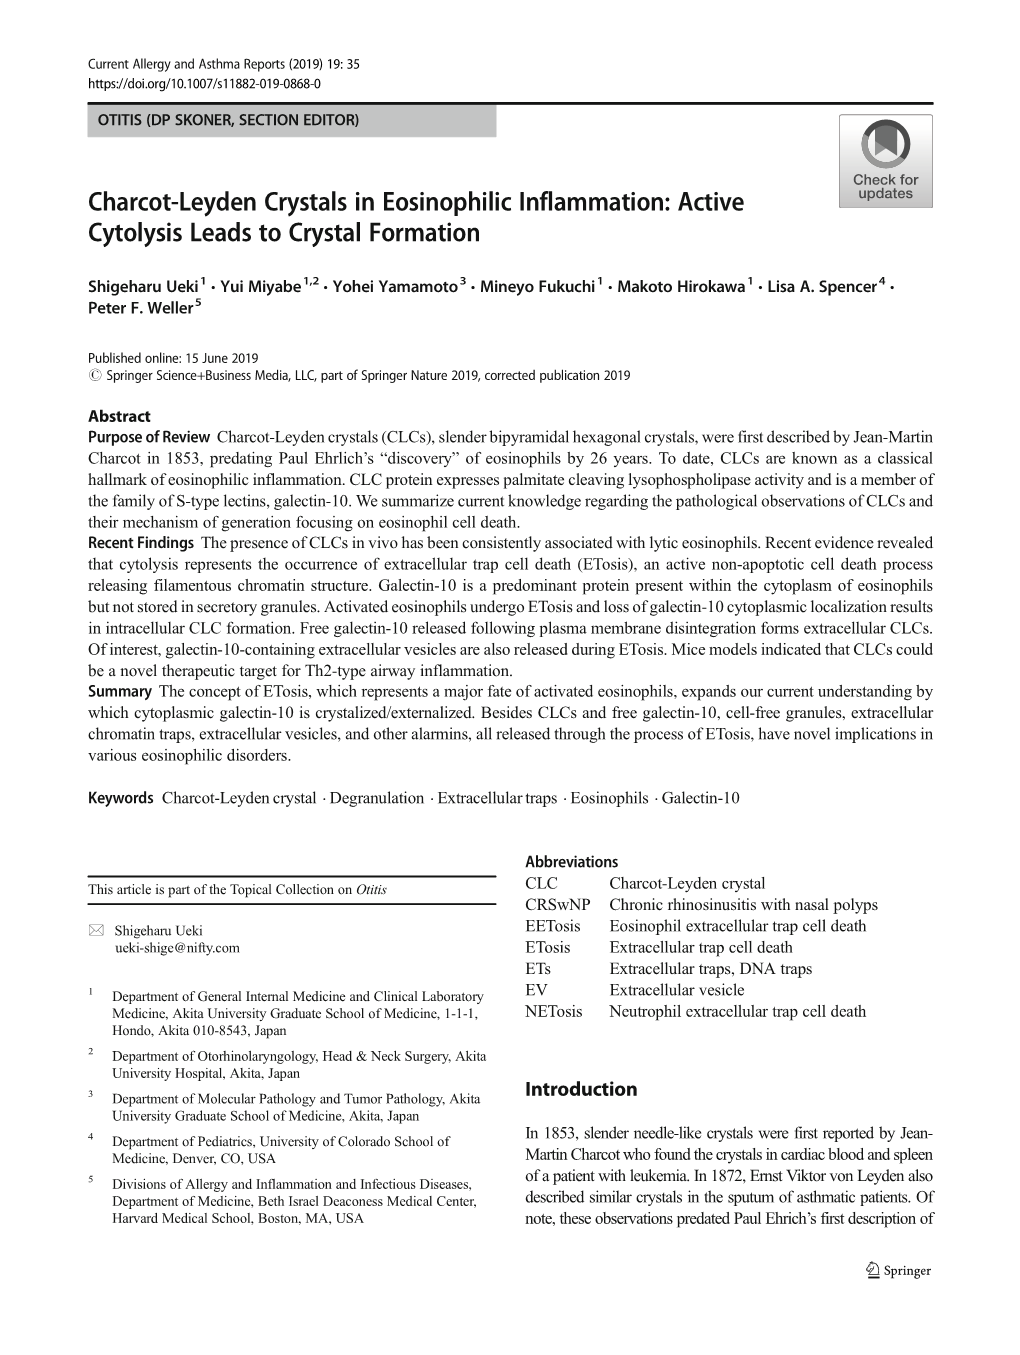 Charcot-Leyden Crystals in Eosinophilic Inflammation: Active Cytolysis Leads to Crystal Formation